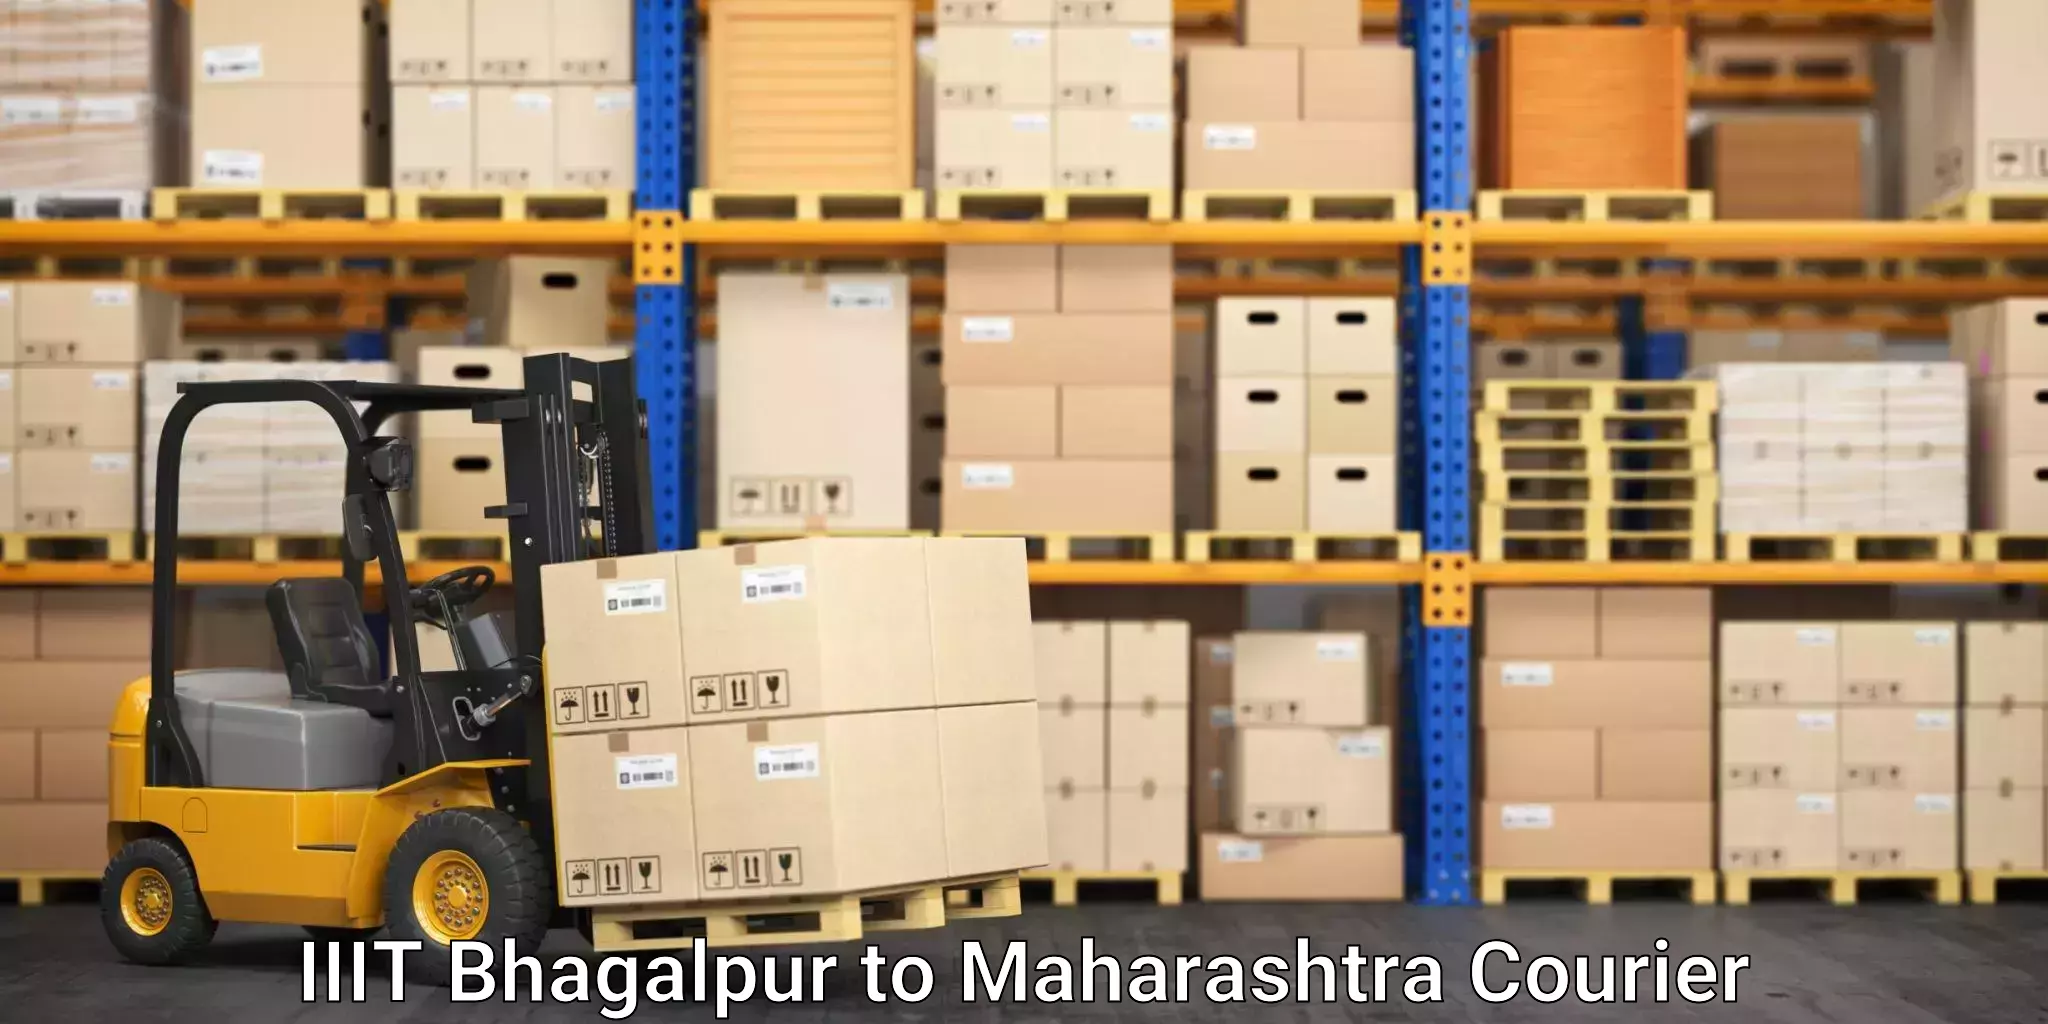 Reliable relocation services IIIT Bhagalpur to Maharashtra